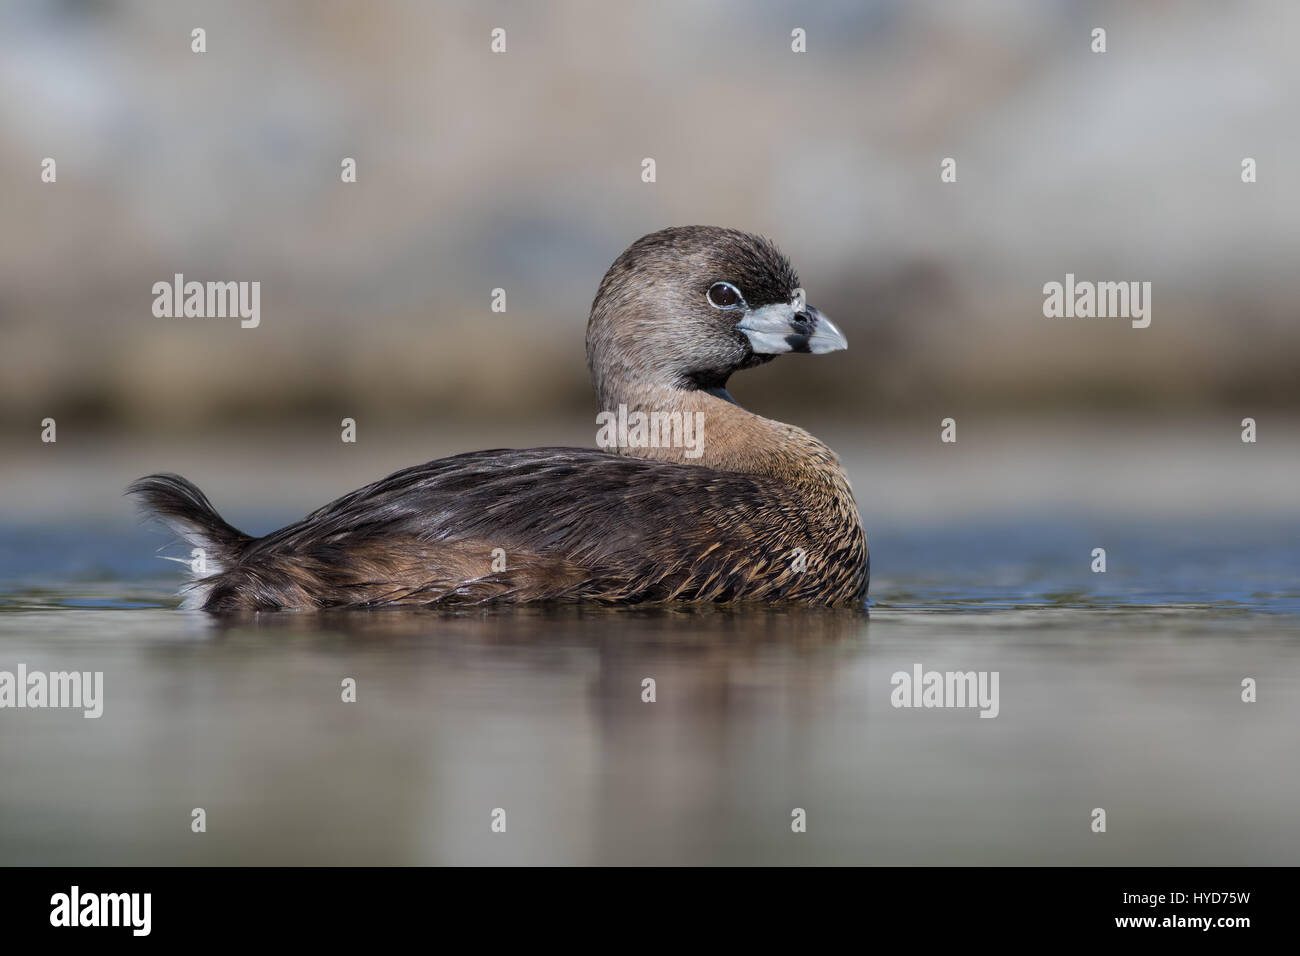 A Pied-billed Grebe cruises by during a lazy early afternoon at a cove where I photograph waterfowl. These are usually shy birds but this one was bold. Stock Photo